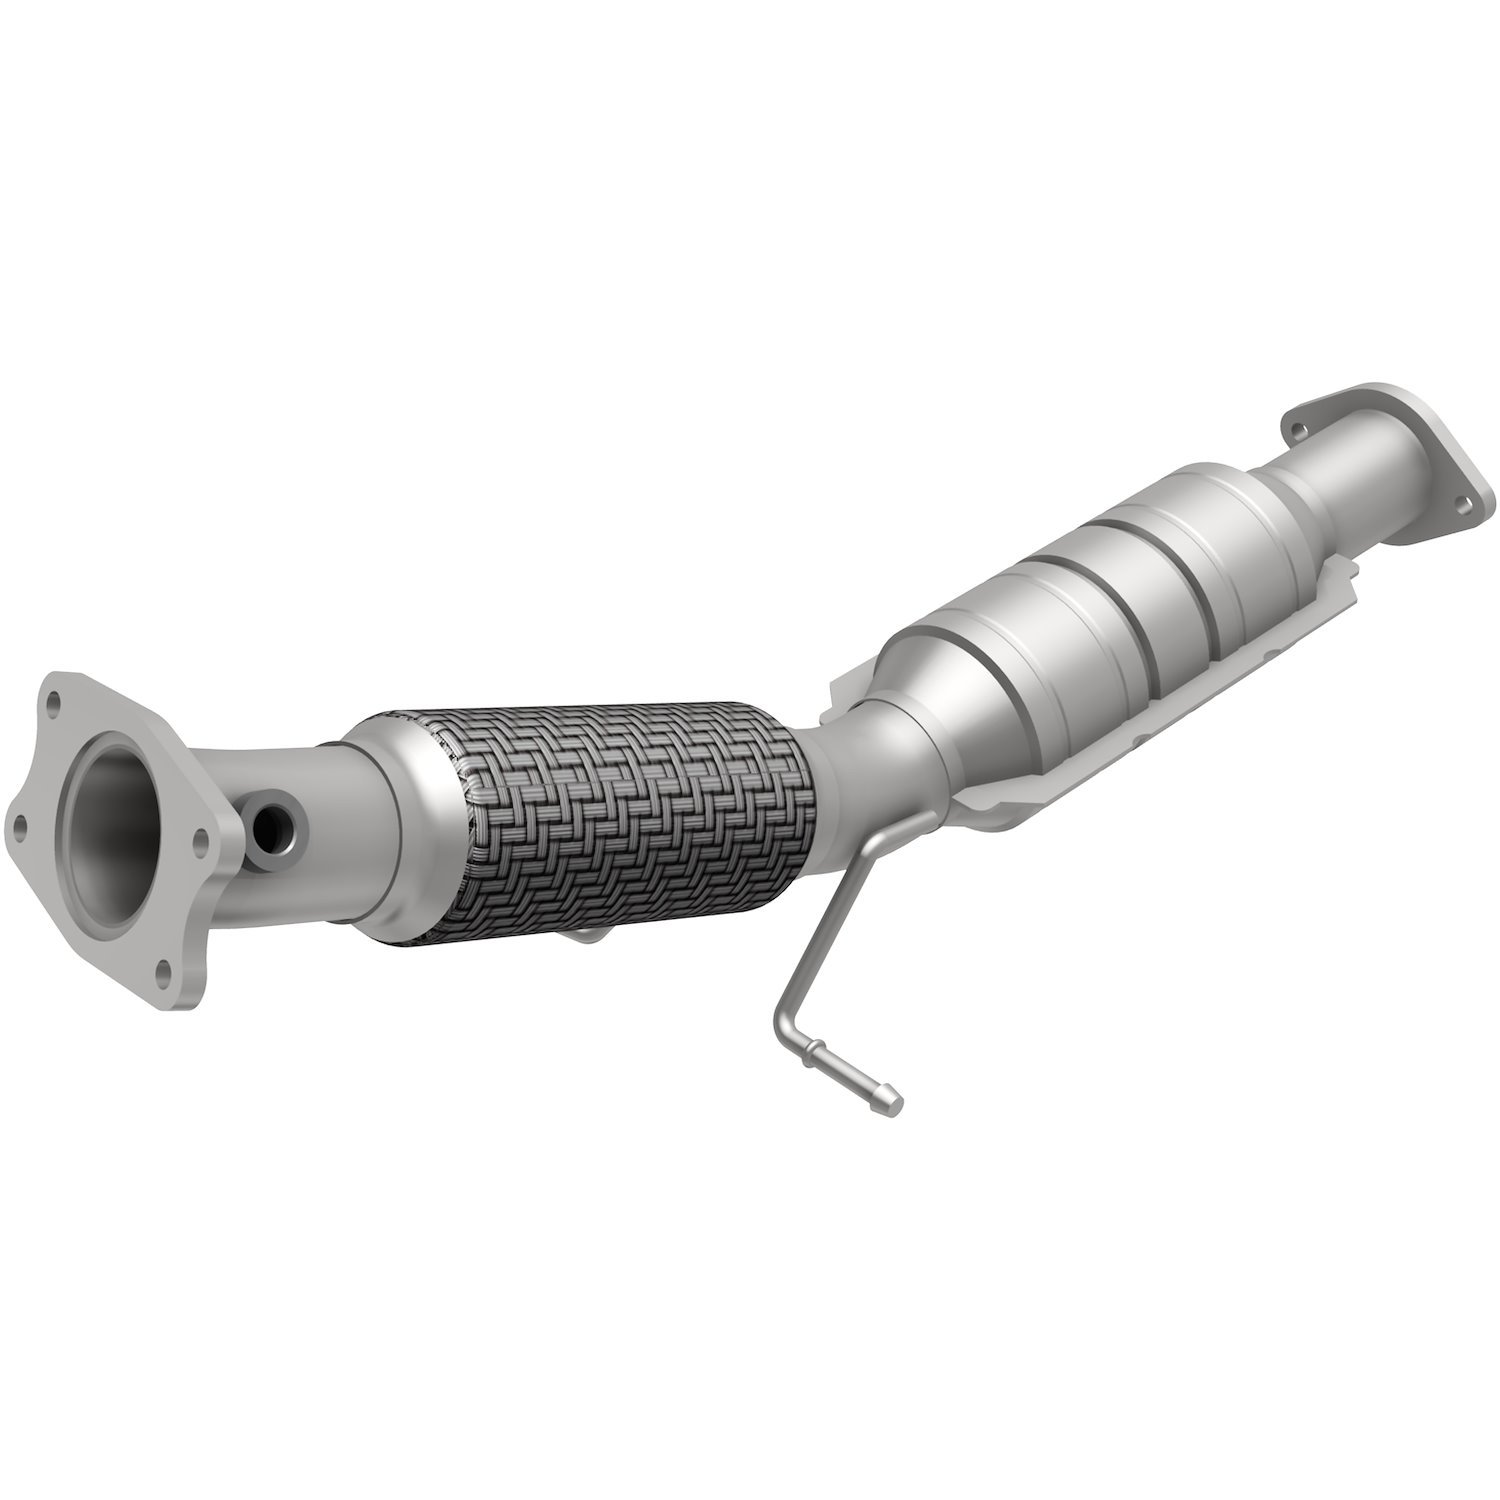 OEM Grade Federal / EPA Compliant Direct-Fit Catalytic Converter 51810